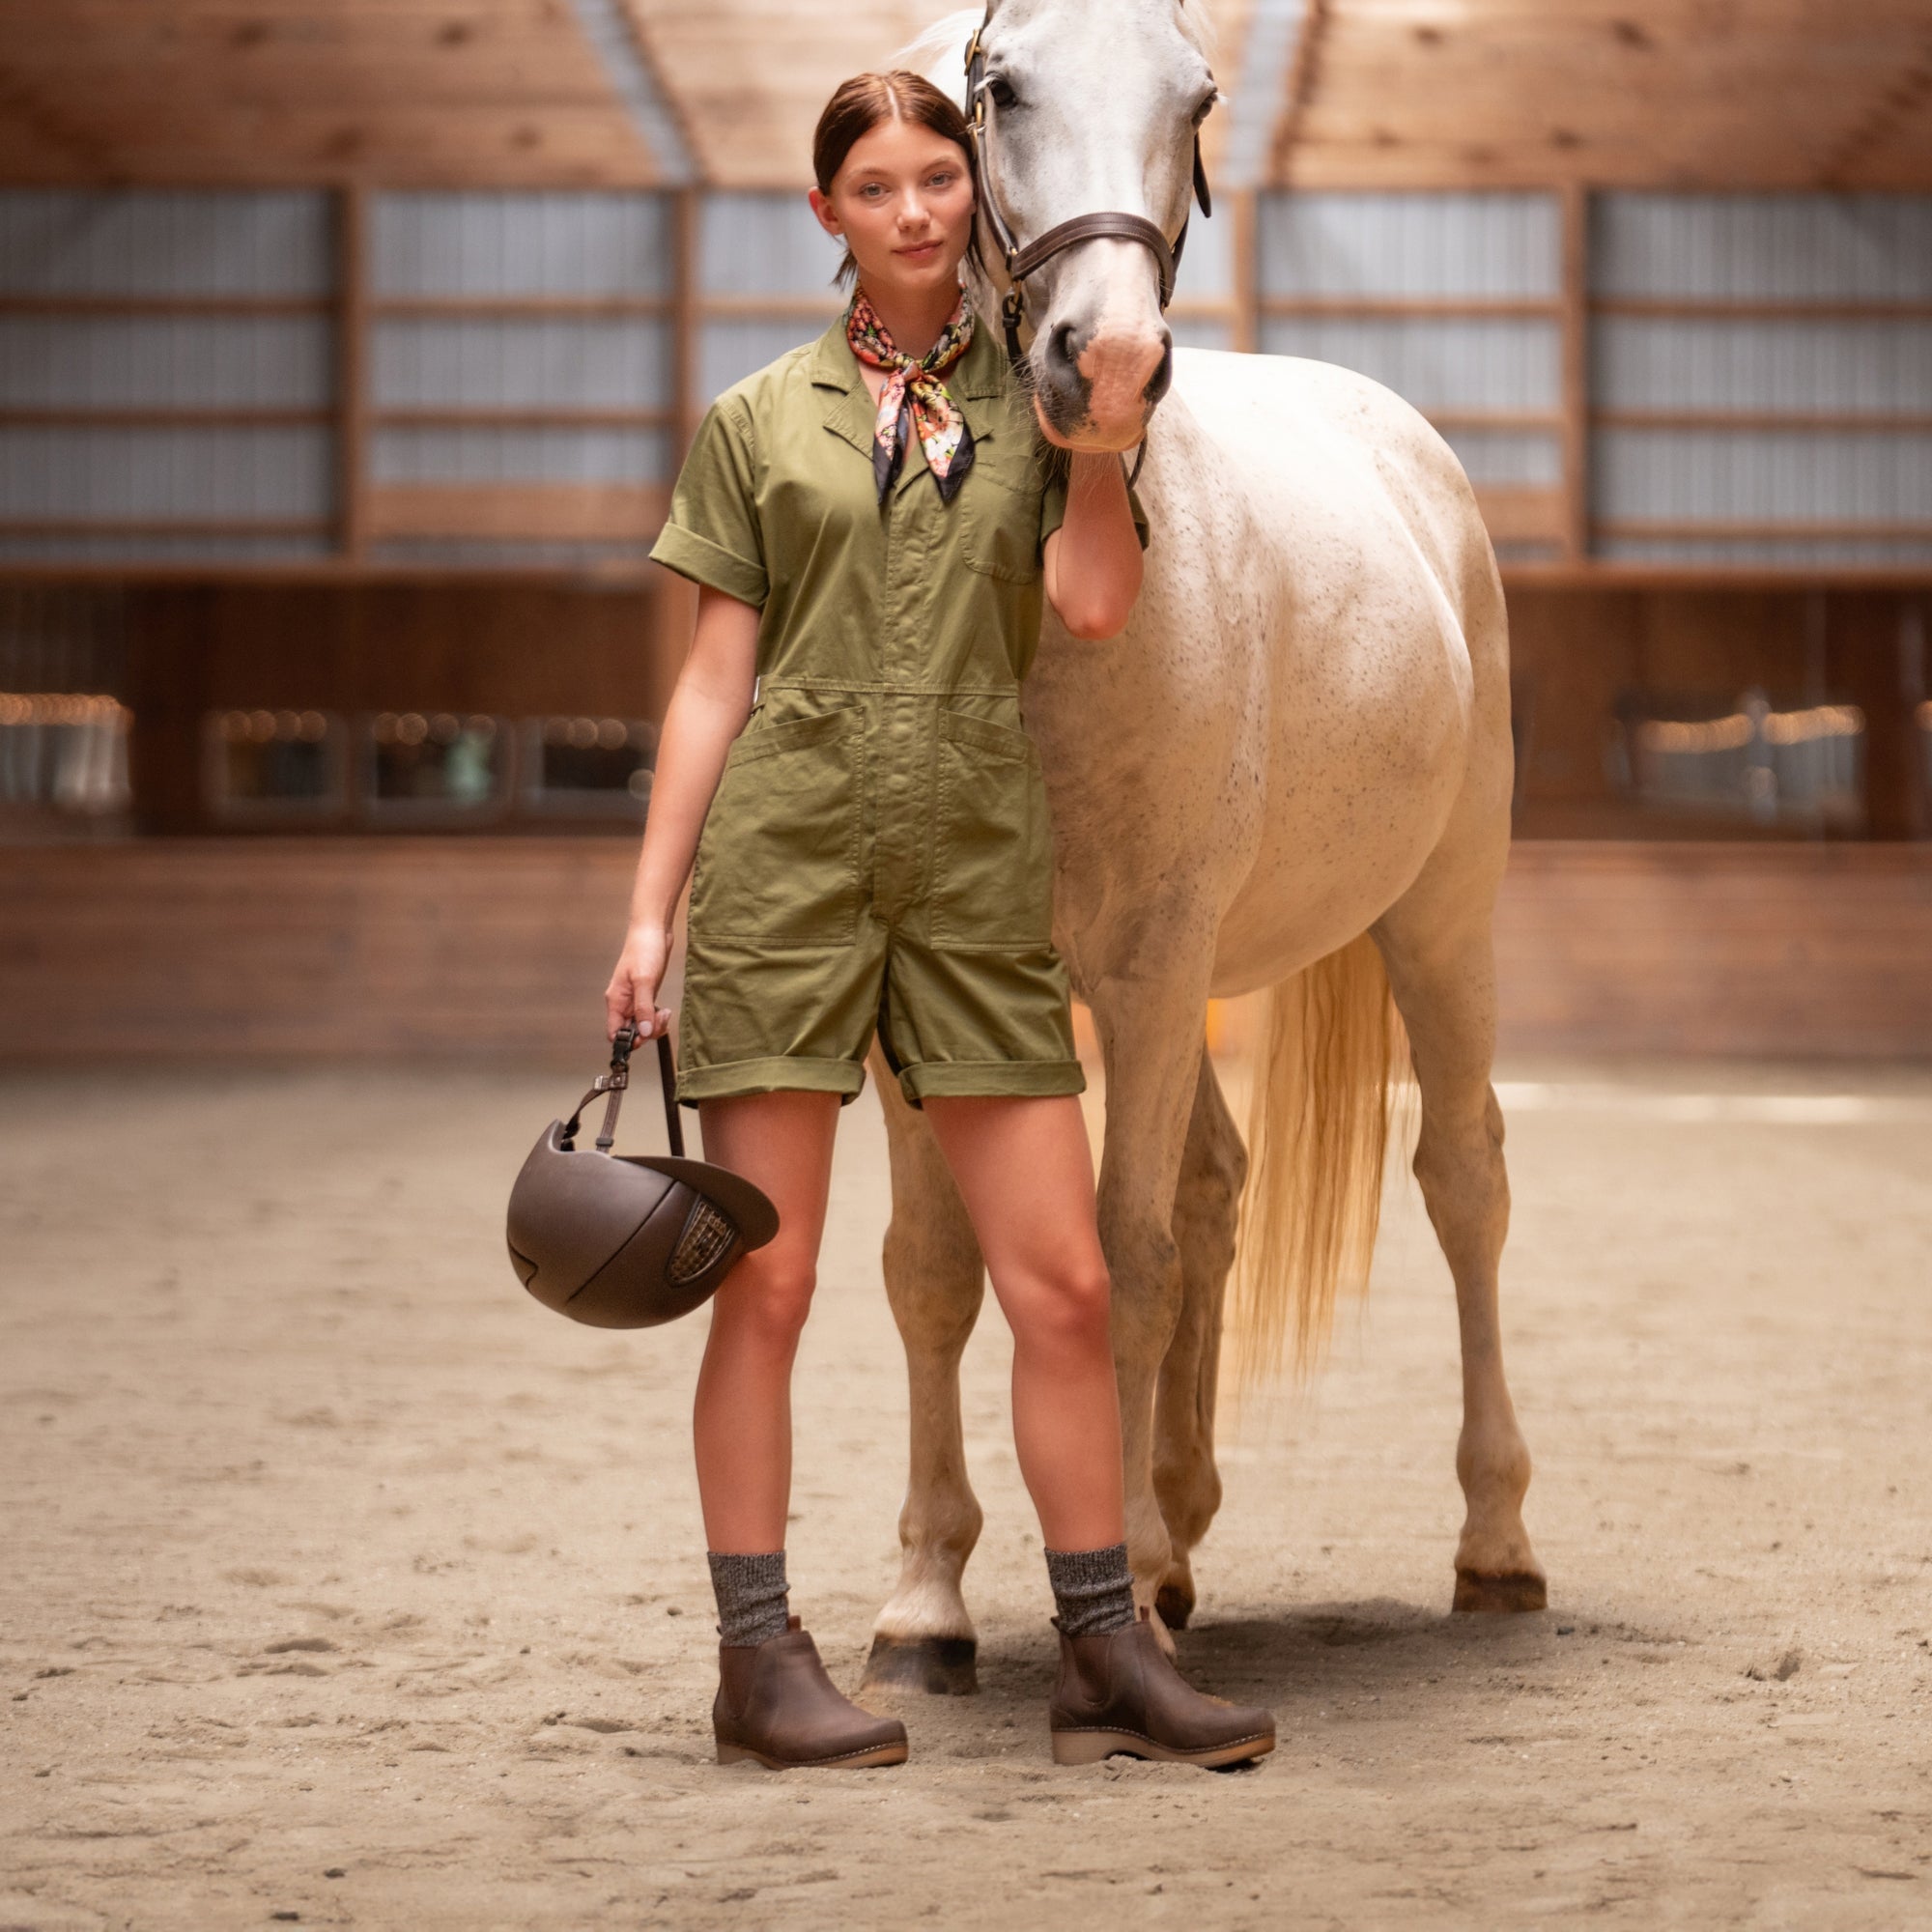 A woman standing with a horse wearing durable brown leather boots.